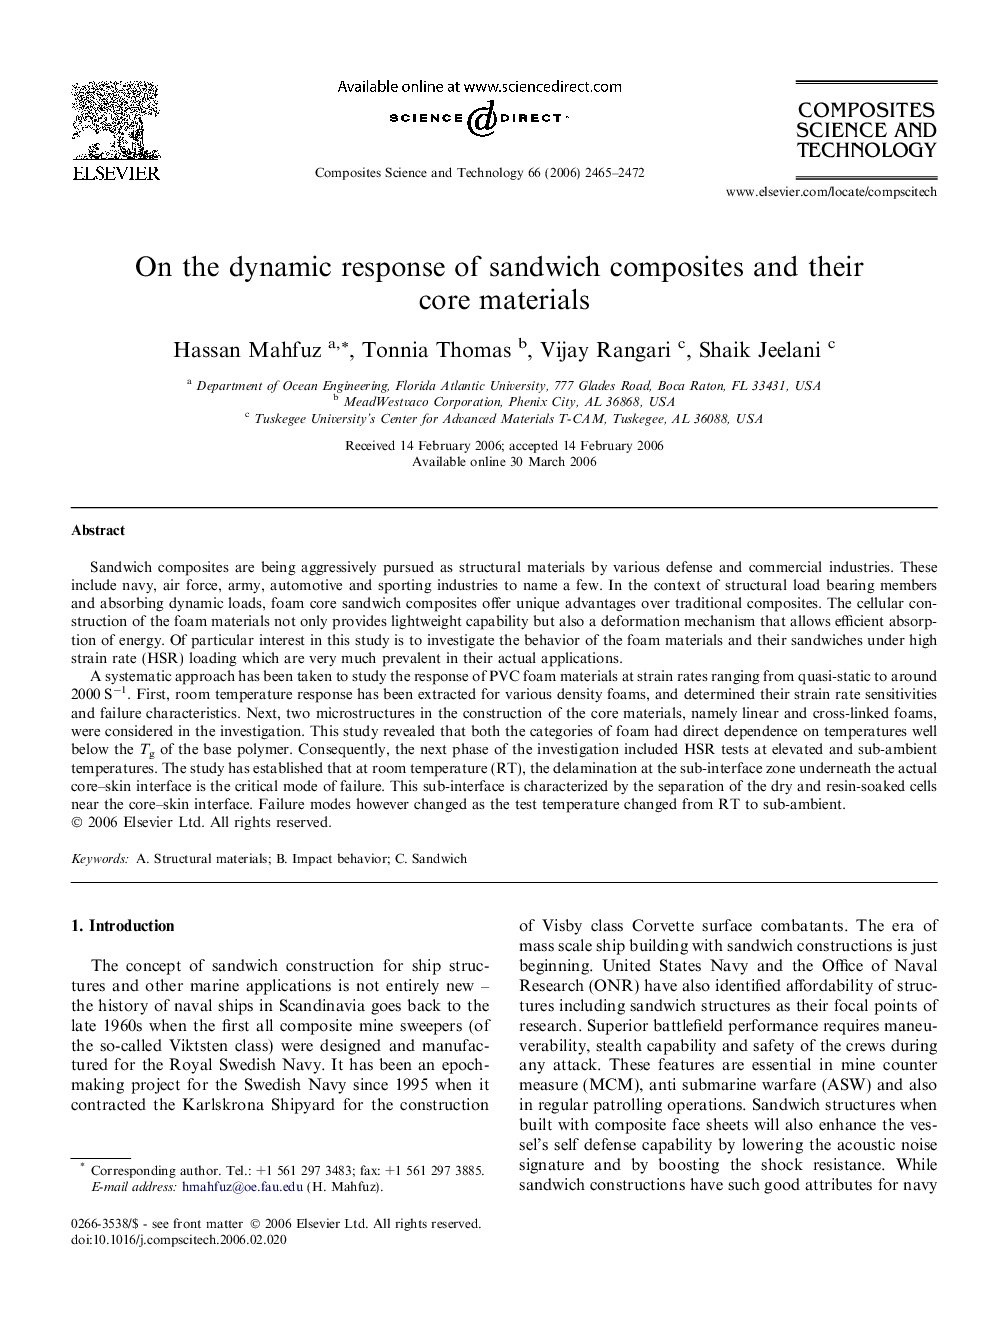 On the dynamic response of sandwich composites and their core materials